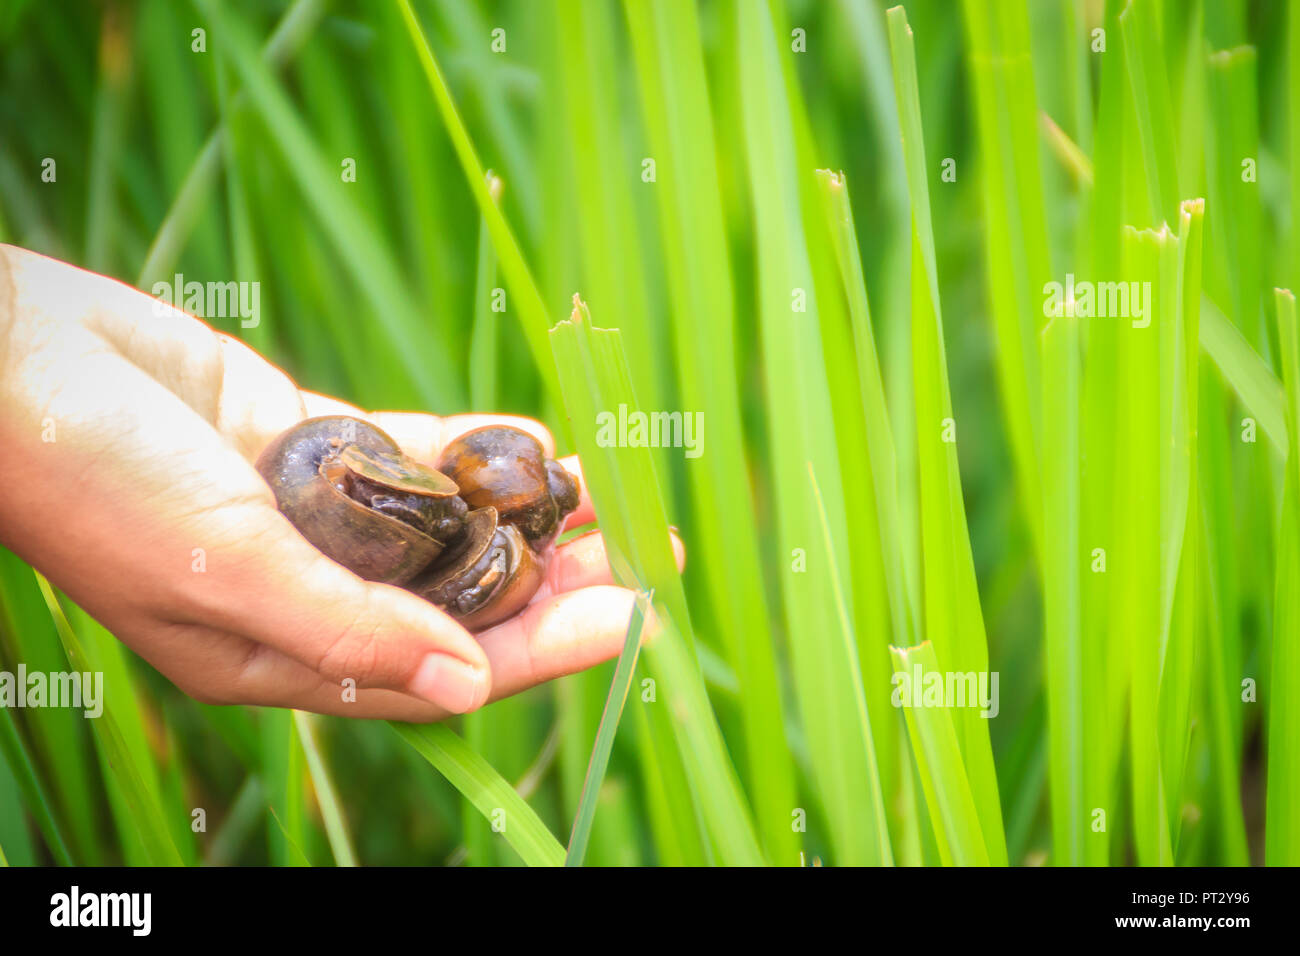 Golden applesnail or Channeled applesnail (Pomacea canaliculata) is picked by hand with the green rice field background. It is alien freshwater mollus Stock Photo